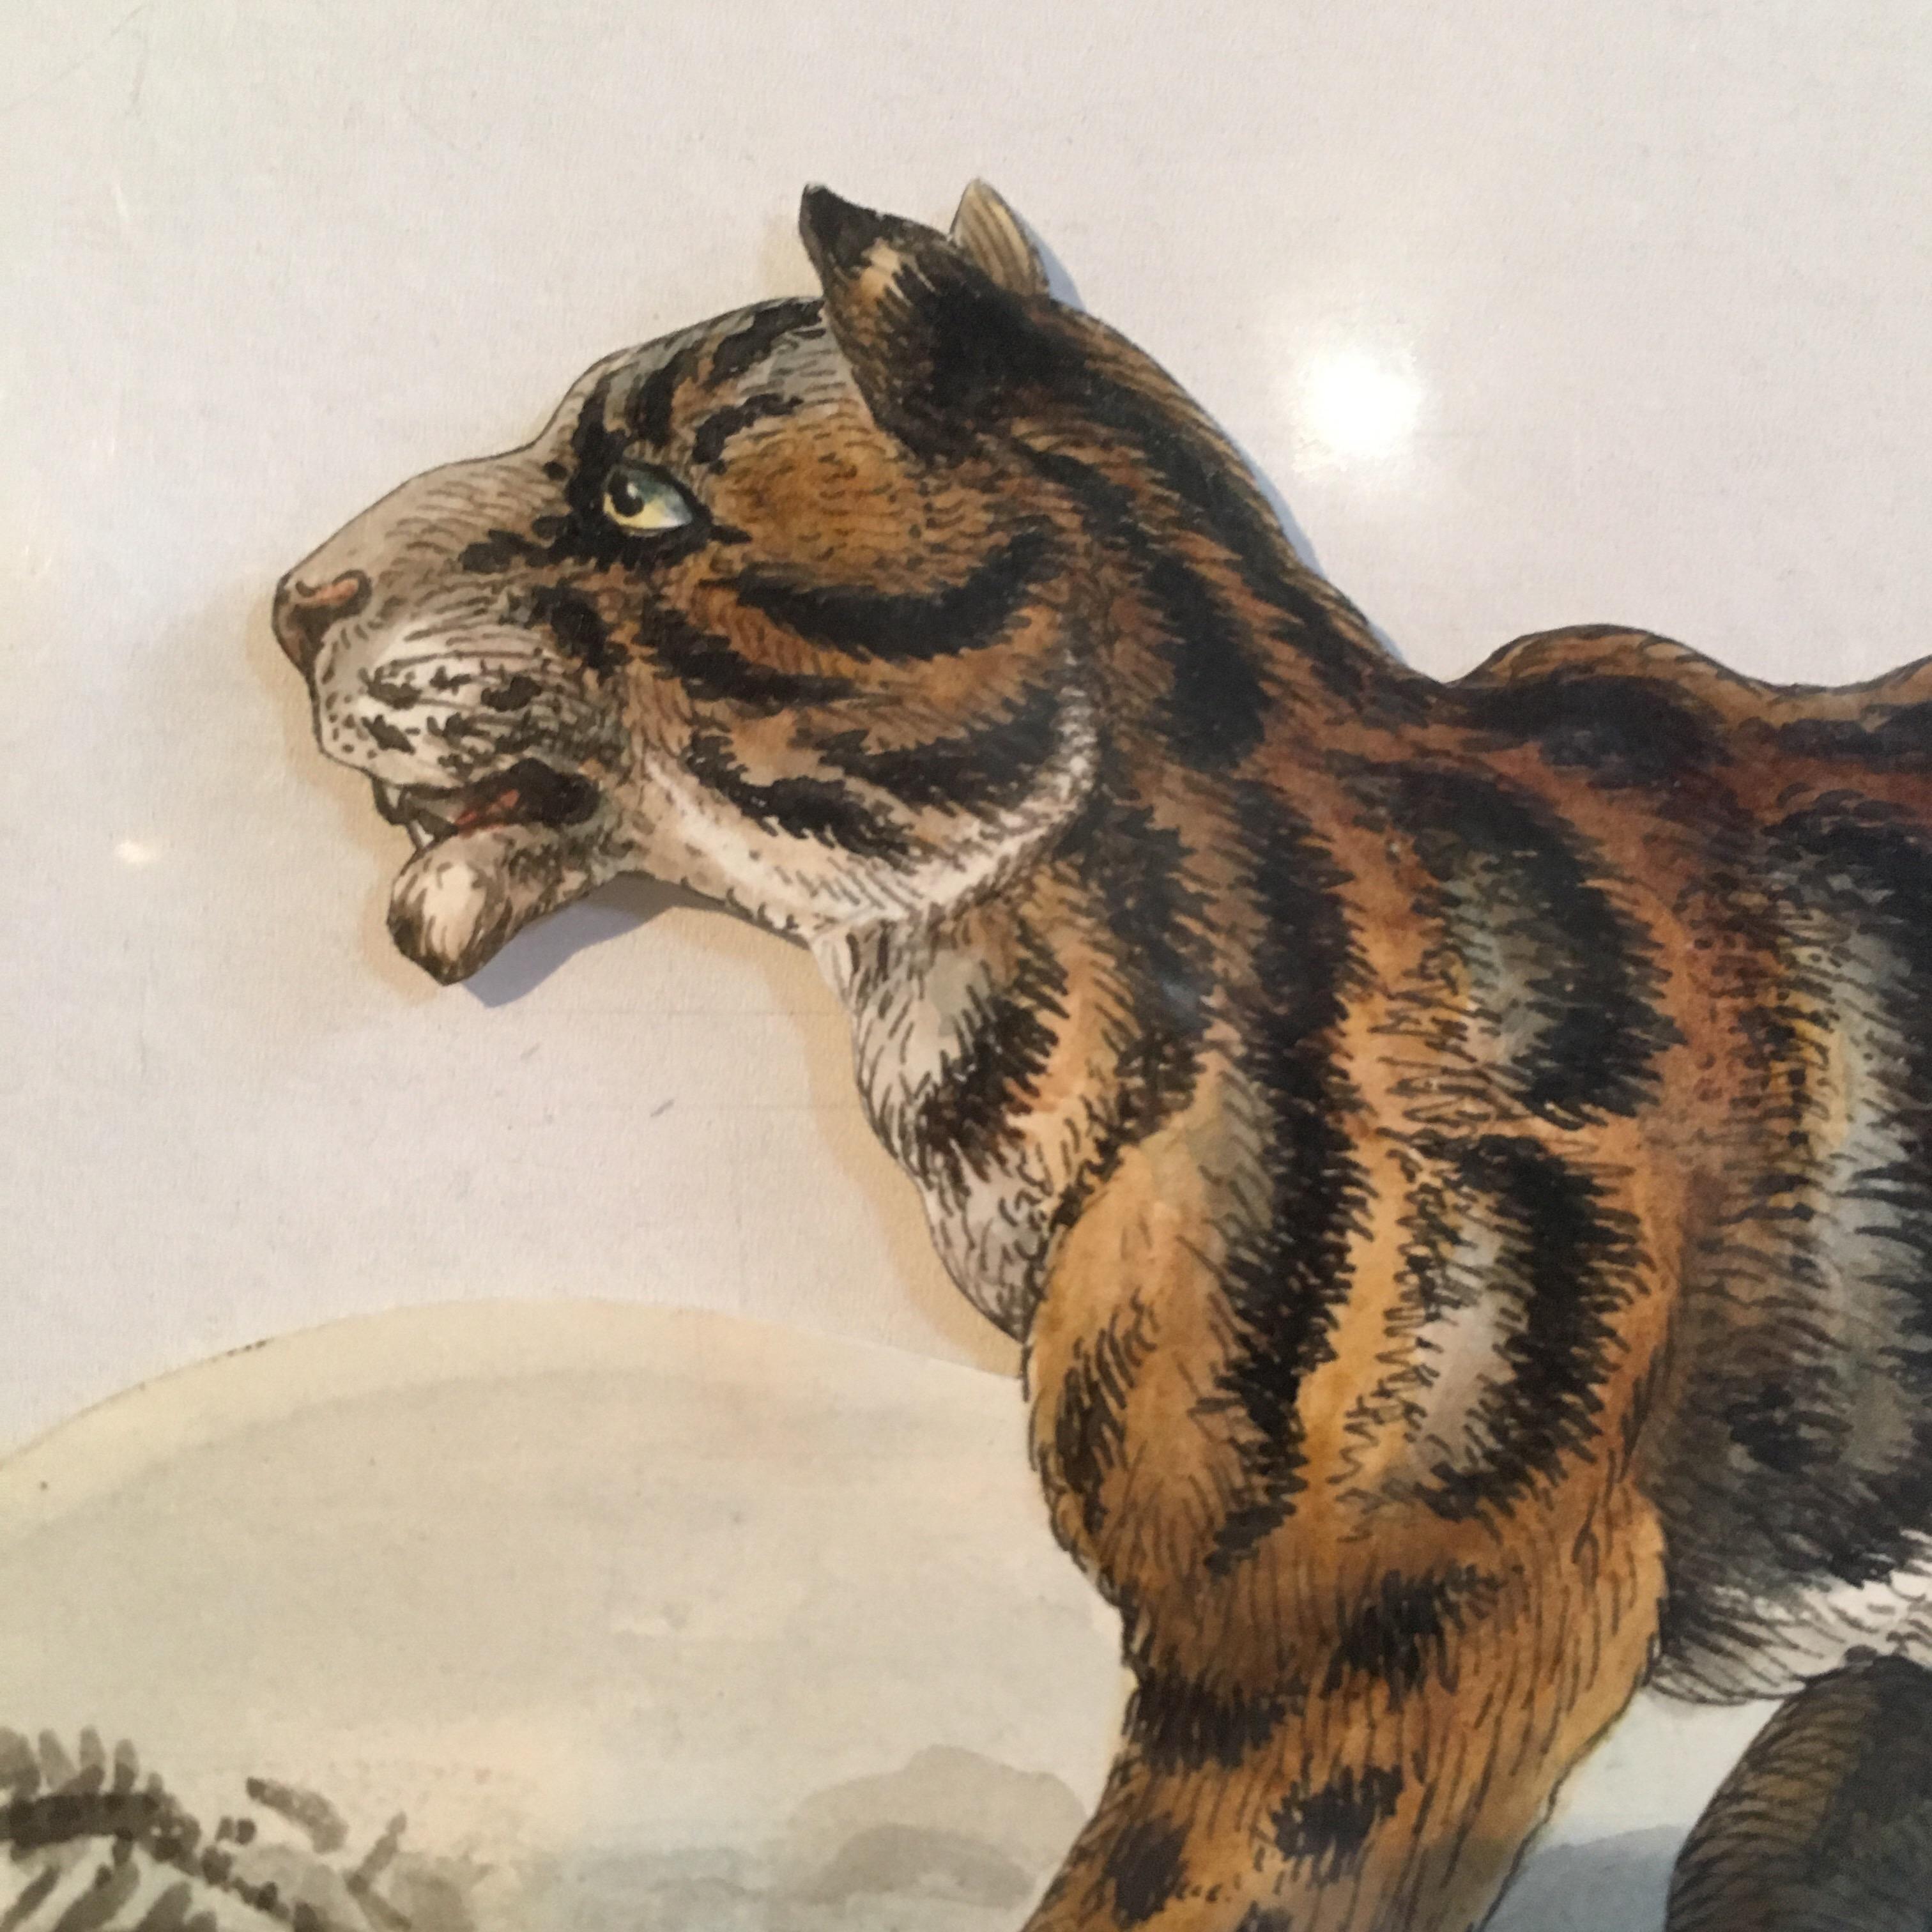 Tiger Antique Watercolour, British Artist, Original Painting
By British artist, early 20th Century
Watercolour and Pencil, cut out and attached to board, framed in board
Framed size: 14.5 x 13 inches

Exquisite portrayal of a magnificent tiger,